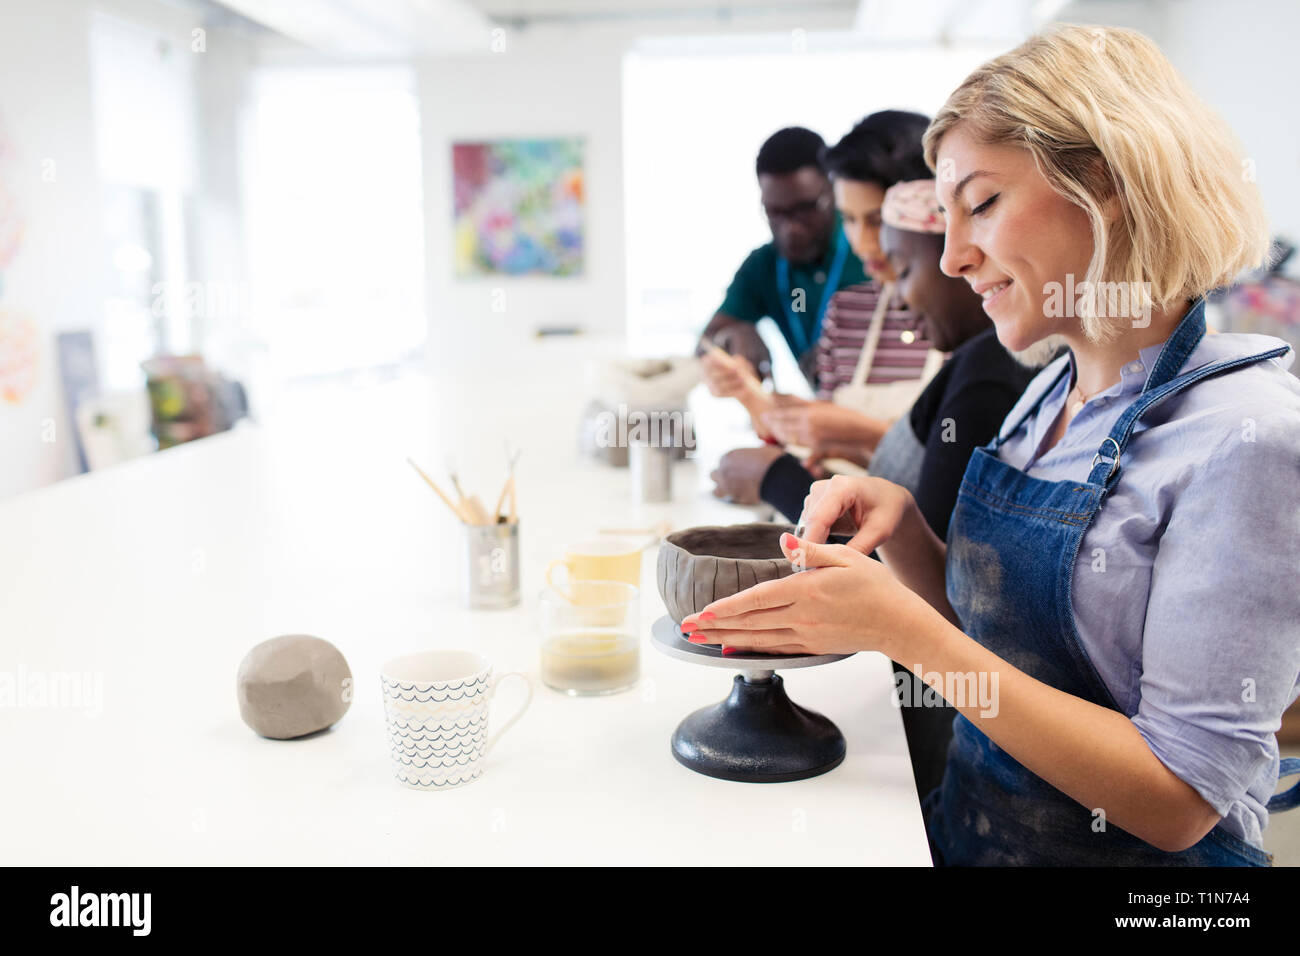 Woman making clay bowl in art class Stock Photo